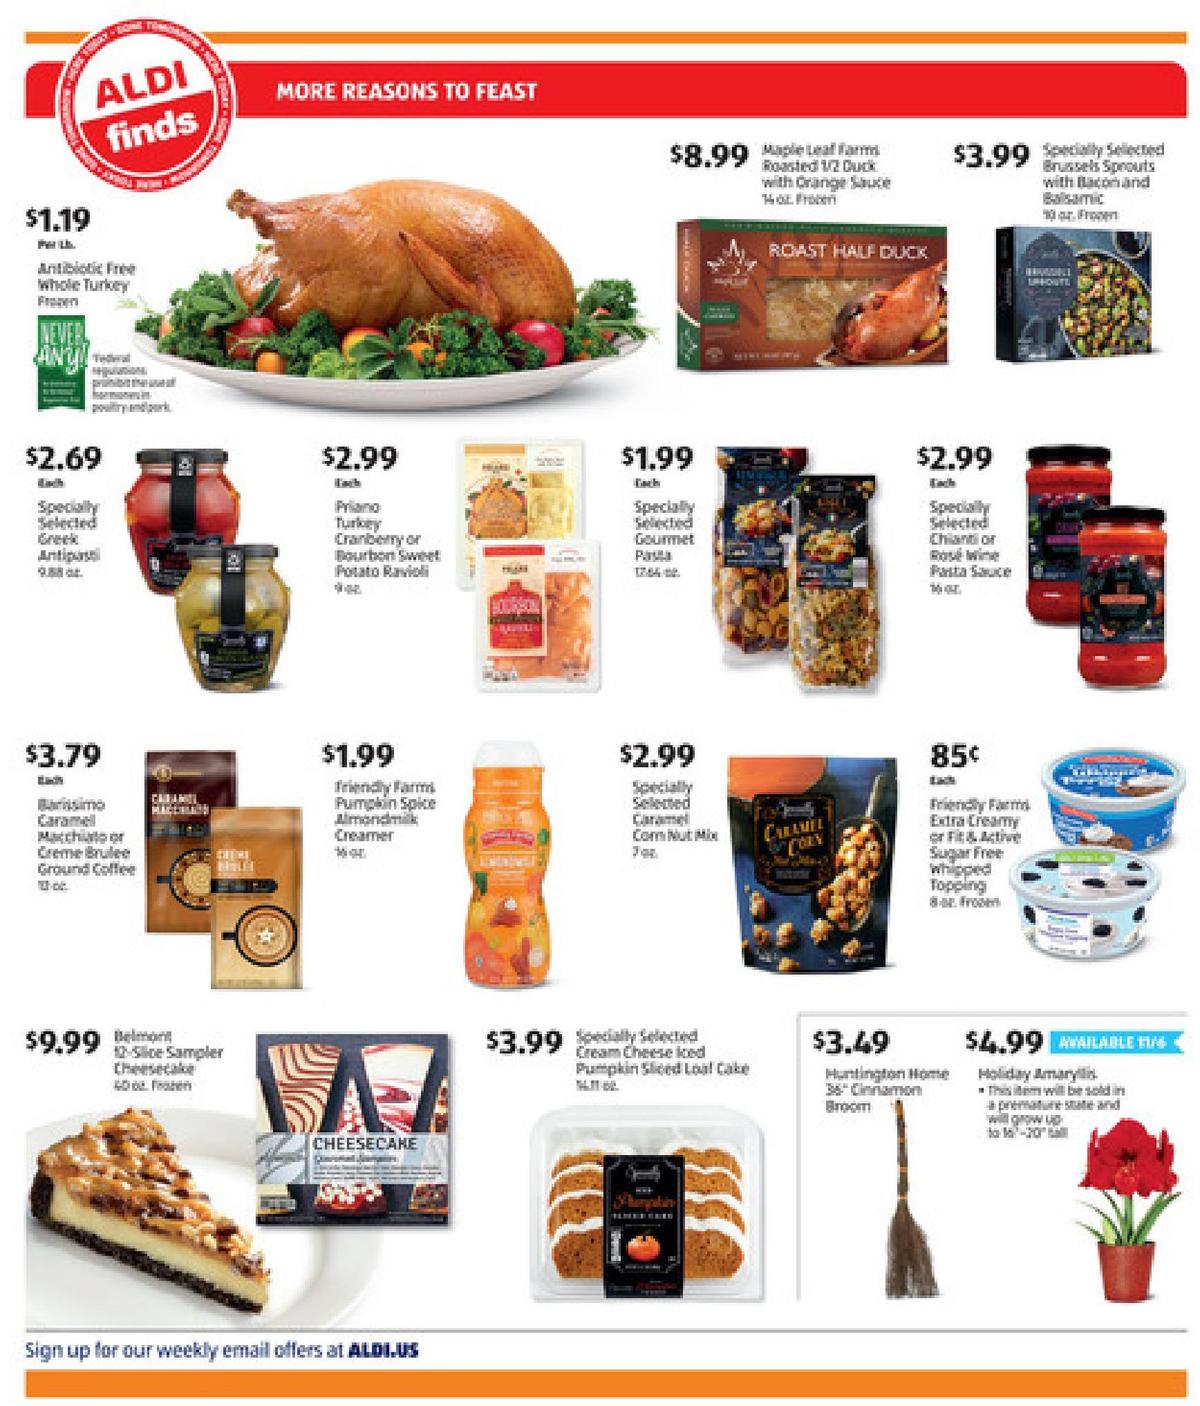 ALDI In Store Ad Weekly Ad from November 3